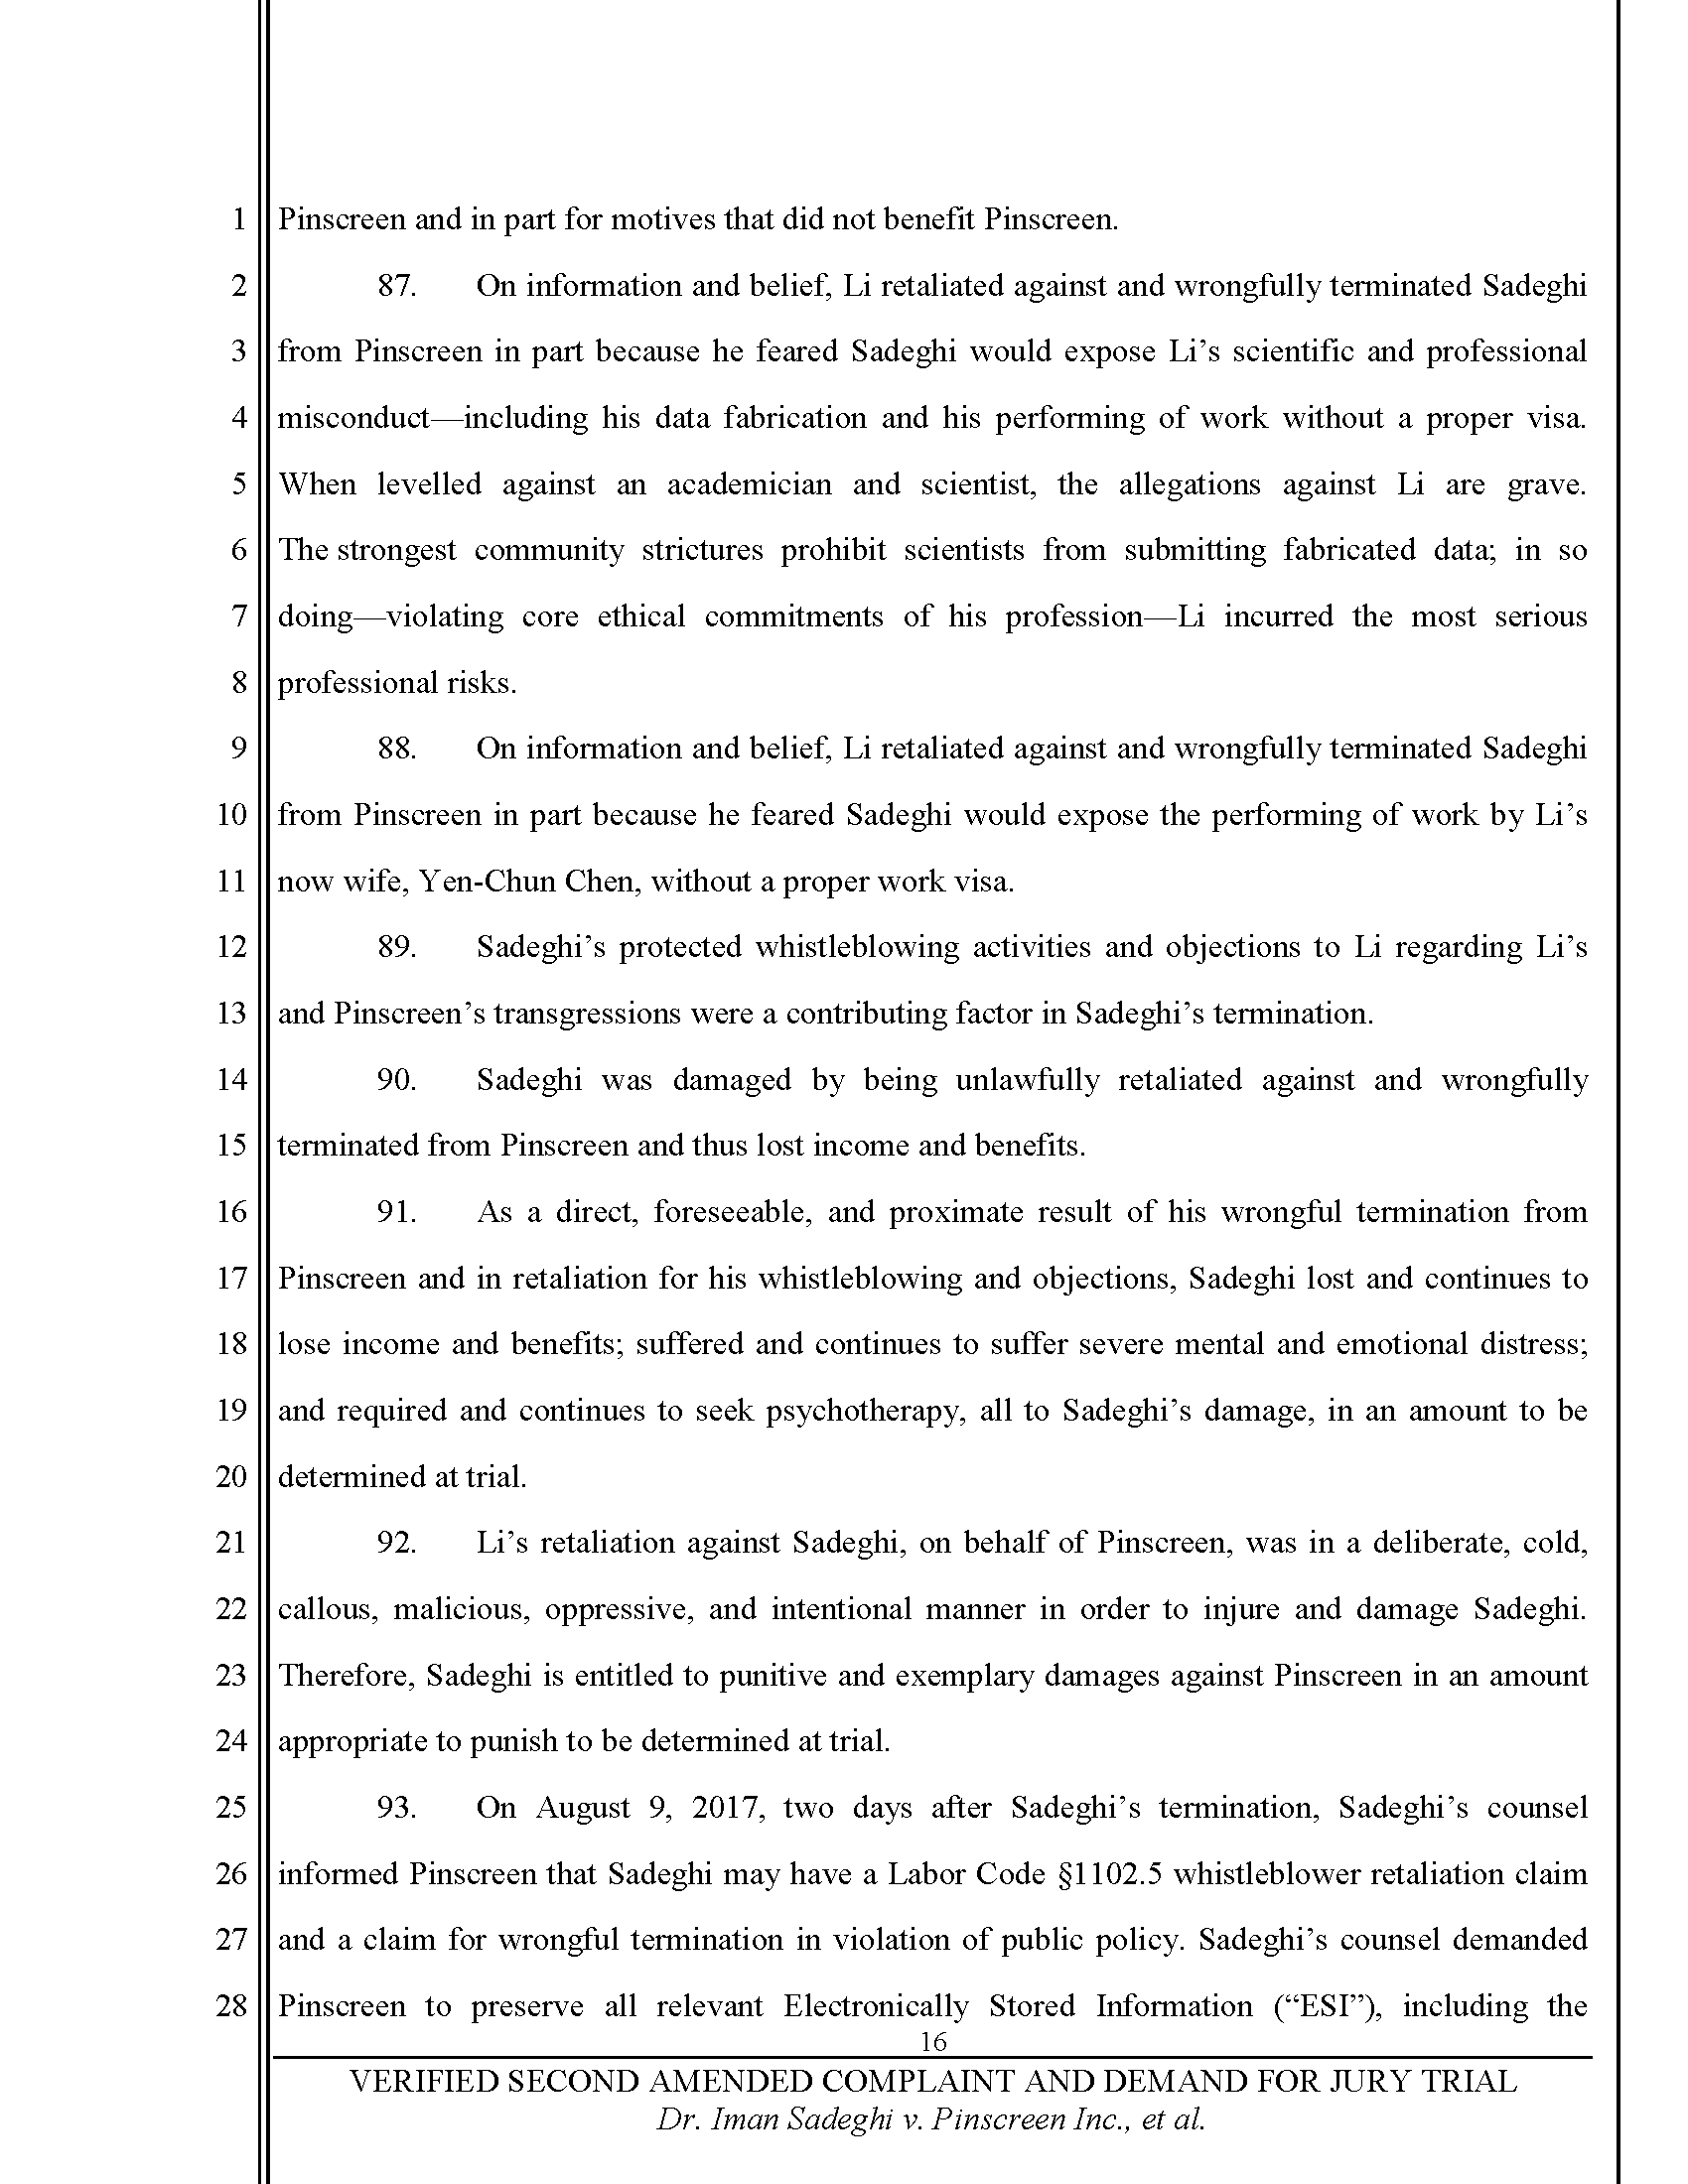 Second Amended Complaint (SAC) Page 17